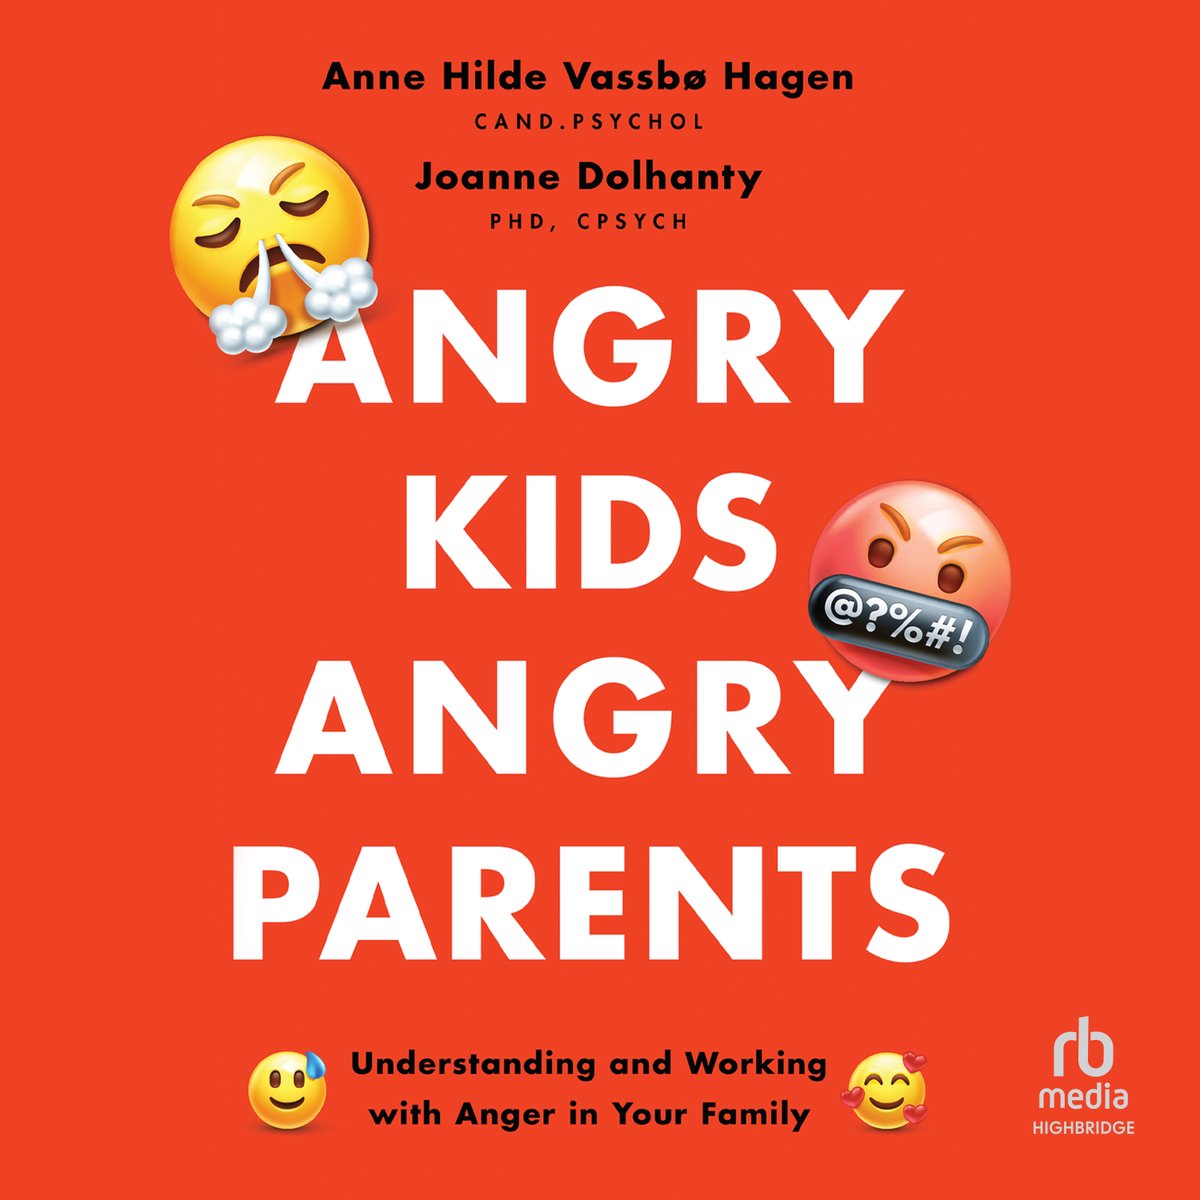 Everything you need to know about your child's anger and how to manage it. highbridgeaudio.com/angrykidsangry… performed by Leanne Woodward #newrelease #audiobook #selfhelp